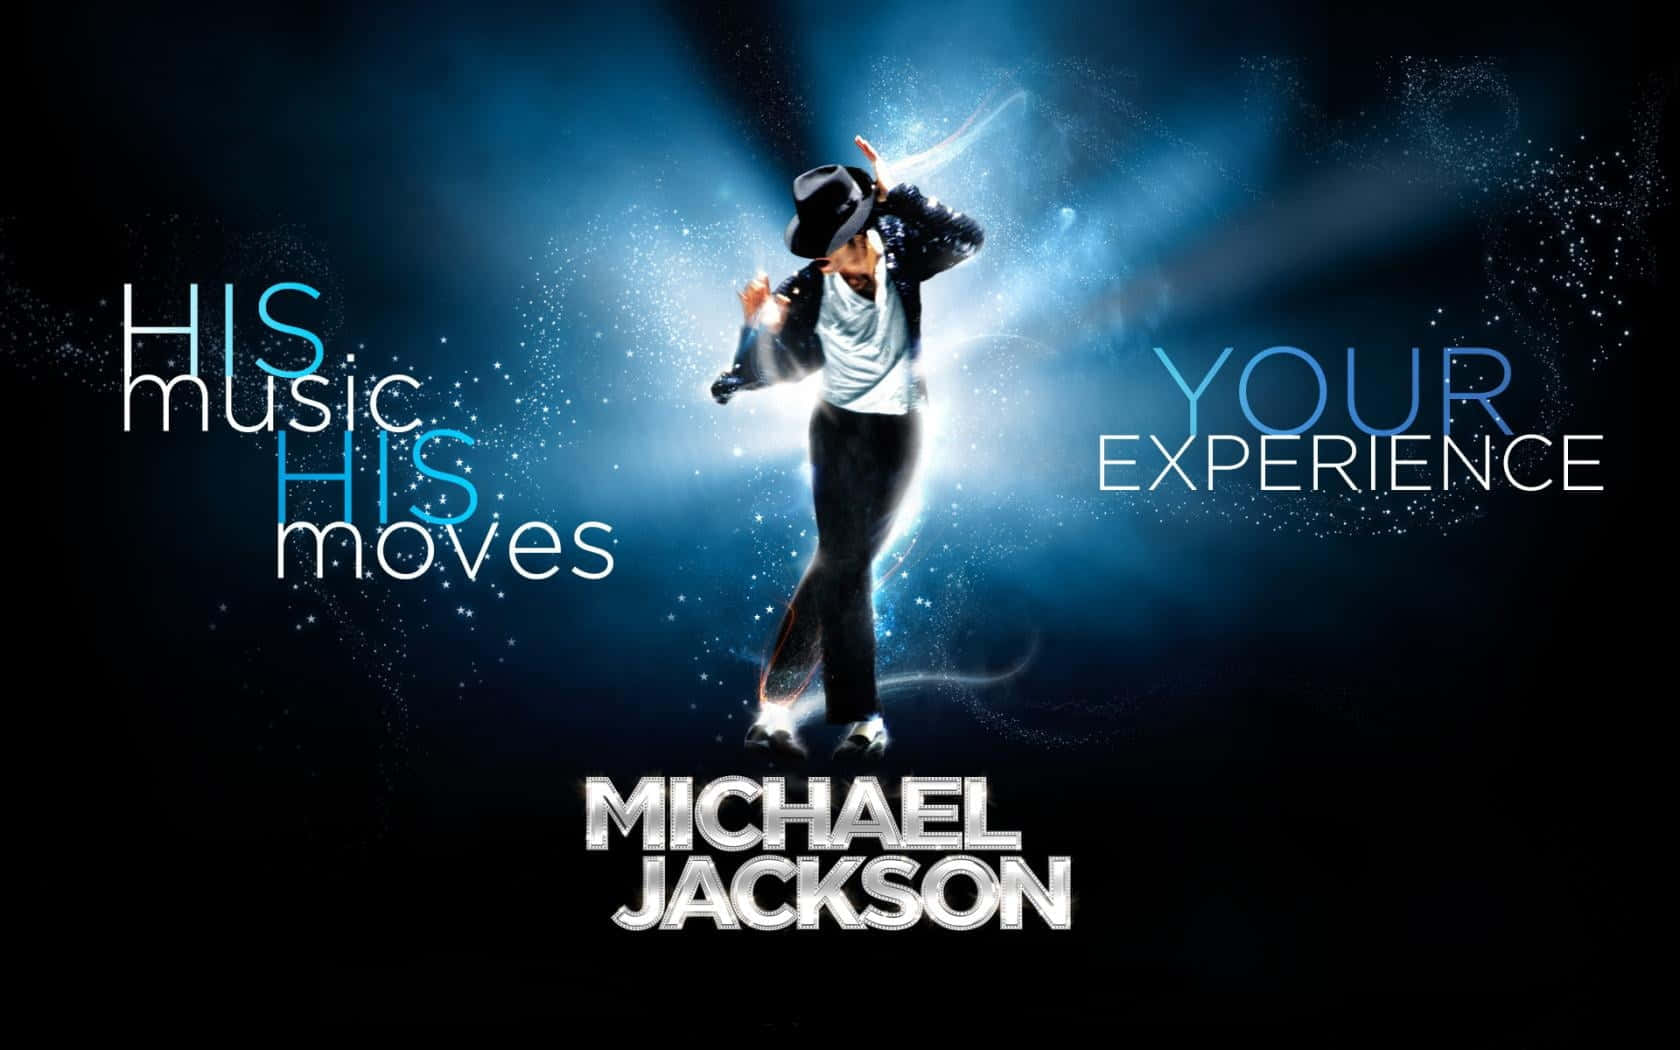 Celebrate Michael Jackson's Legacy With an Iphone Wallpaper